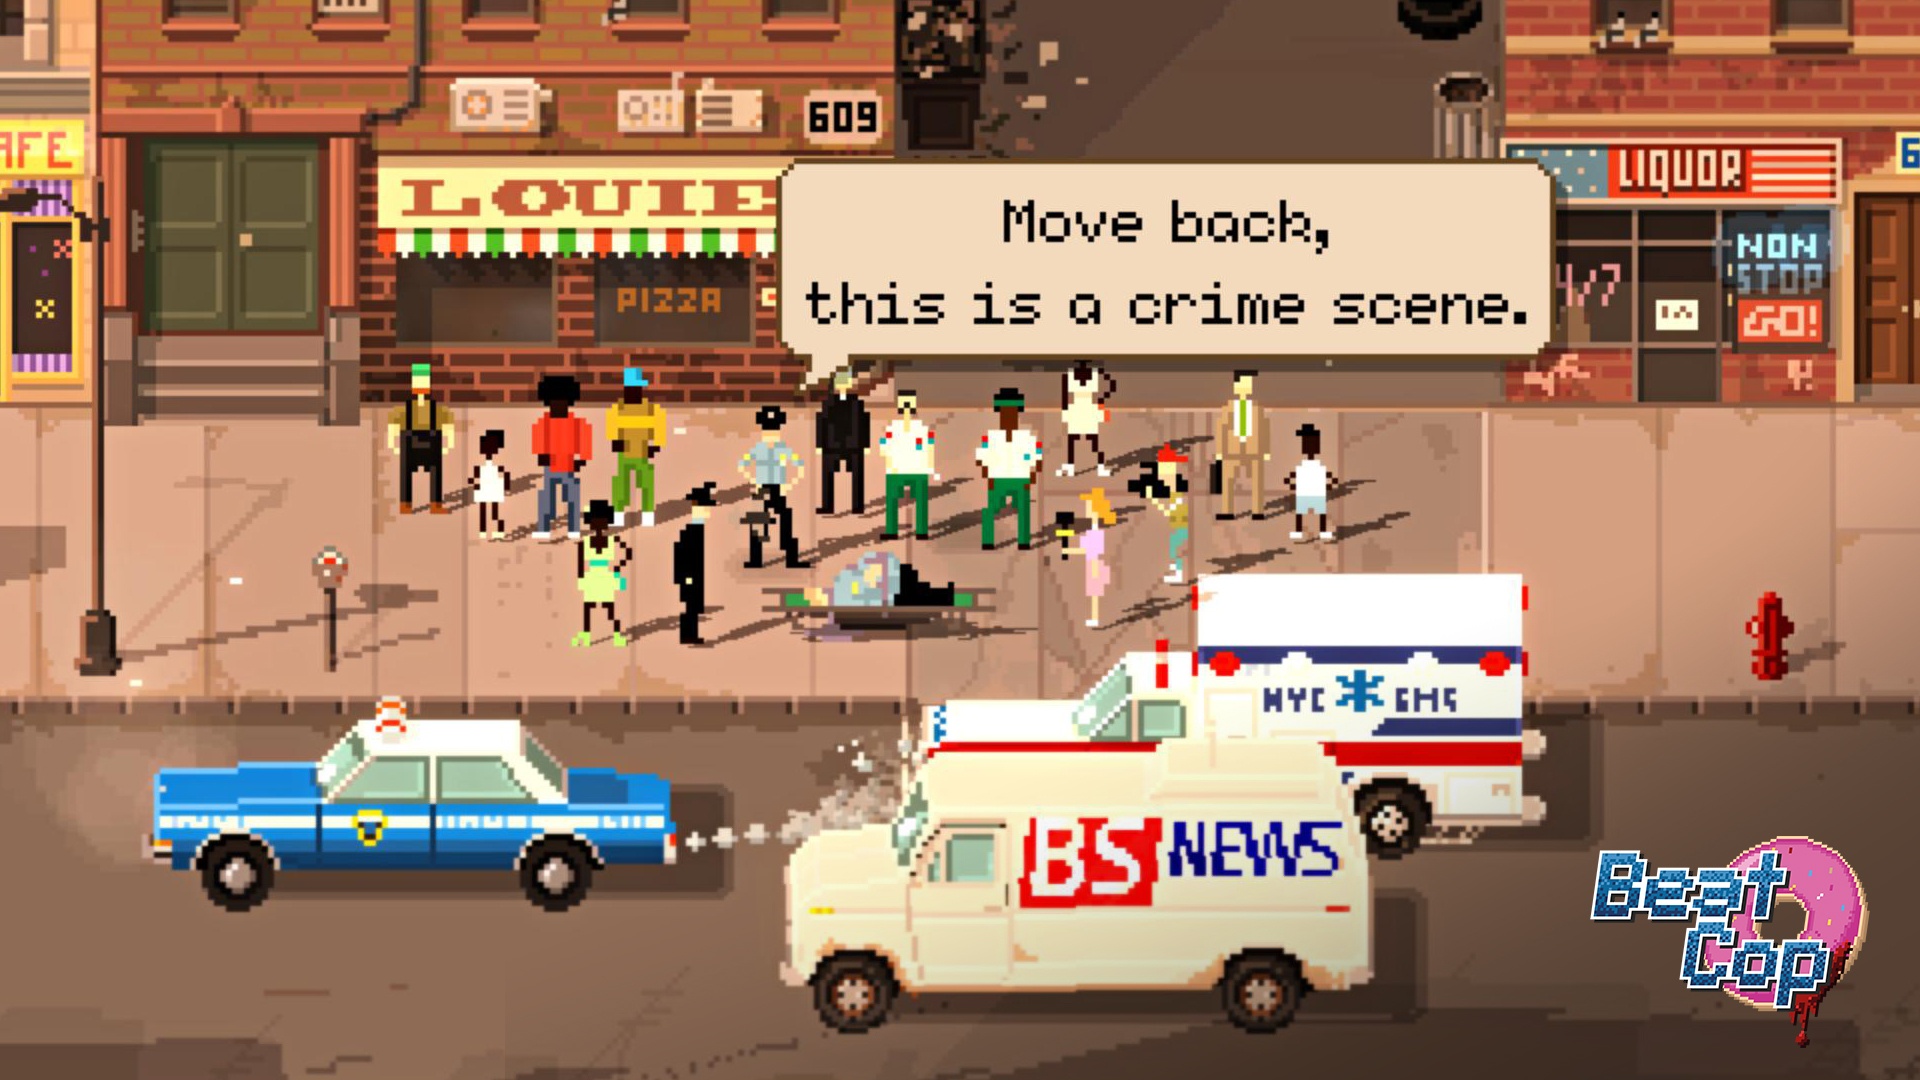 Beat cop game review